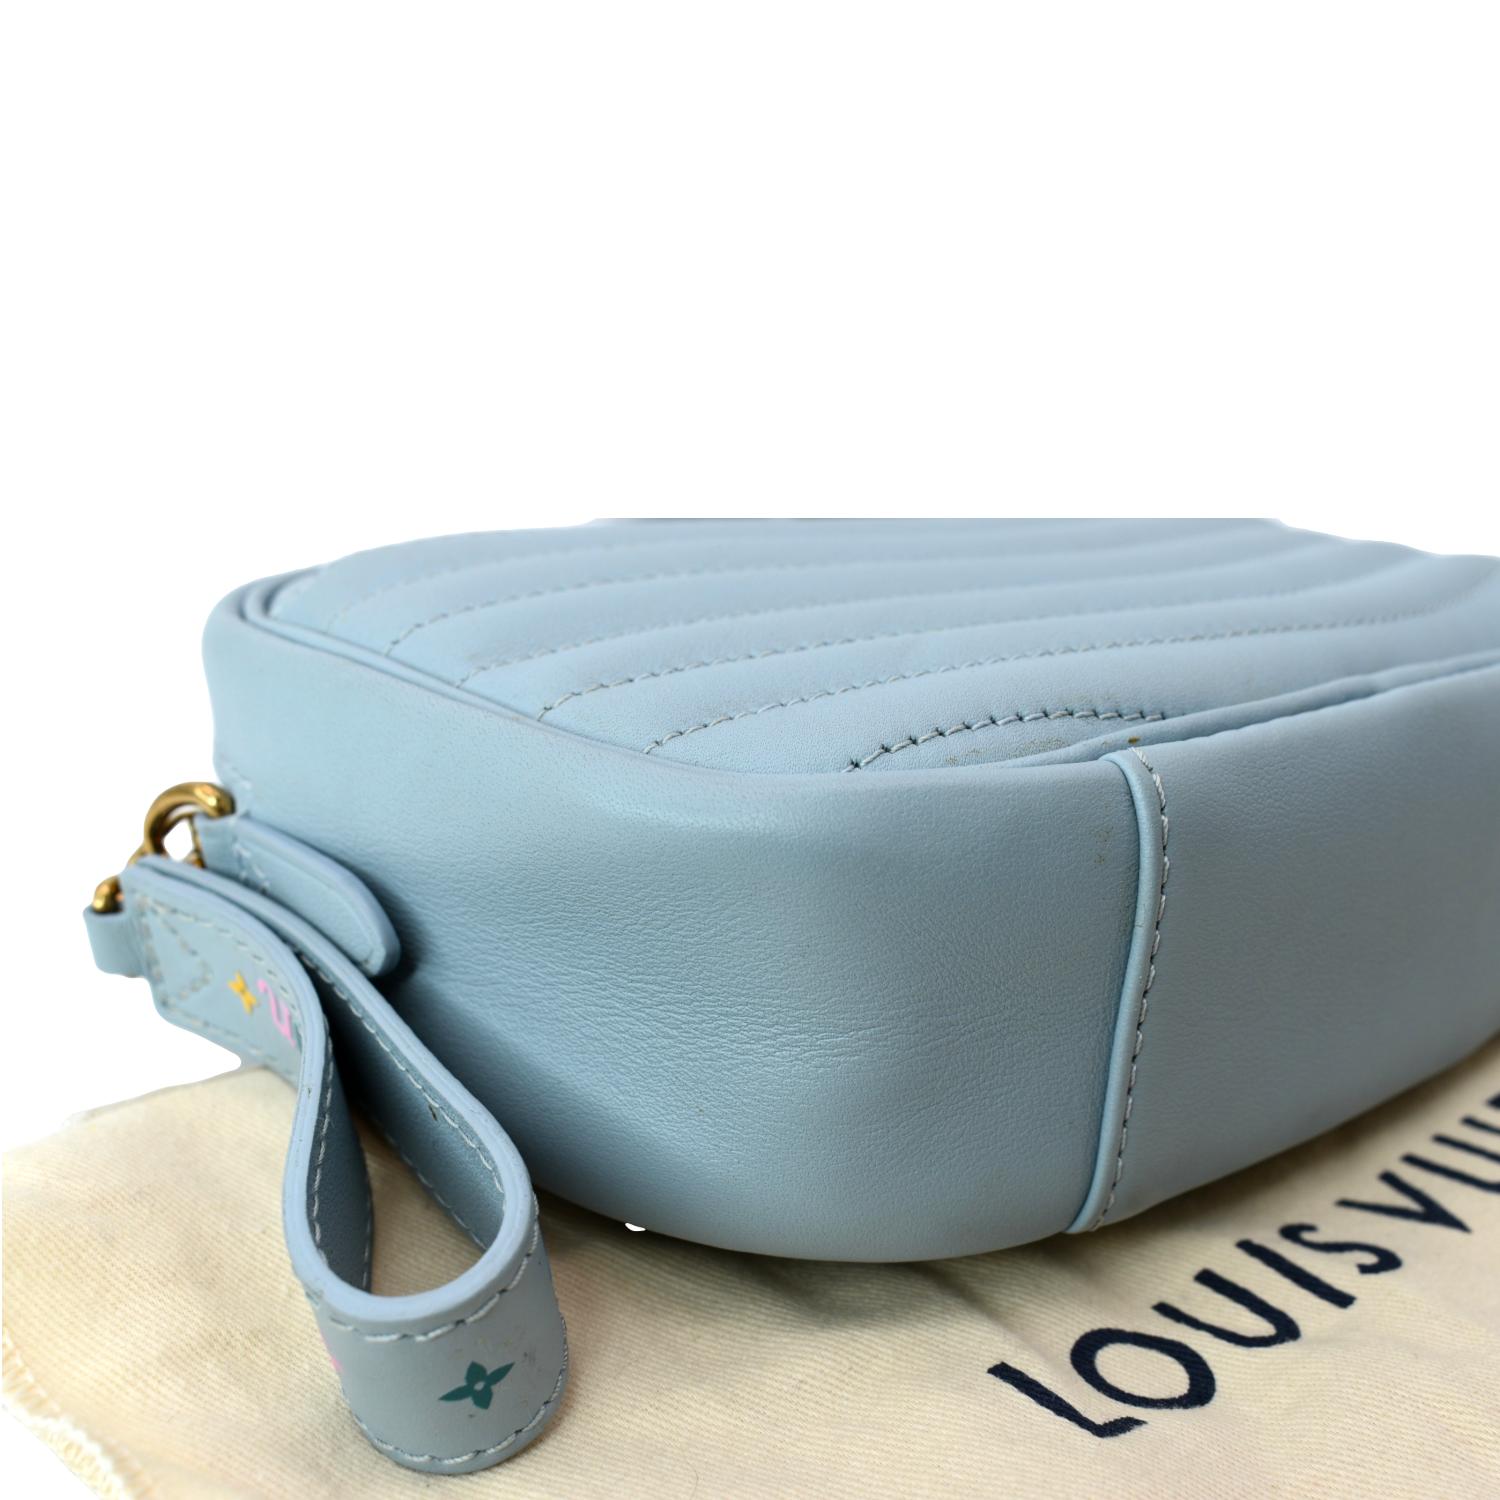 FWRD Renew Louis Vuitton New Wave Quilted Leather Camera Bag in Baby Blue.